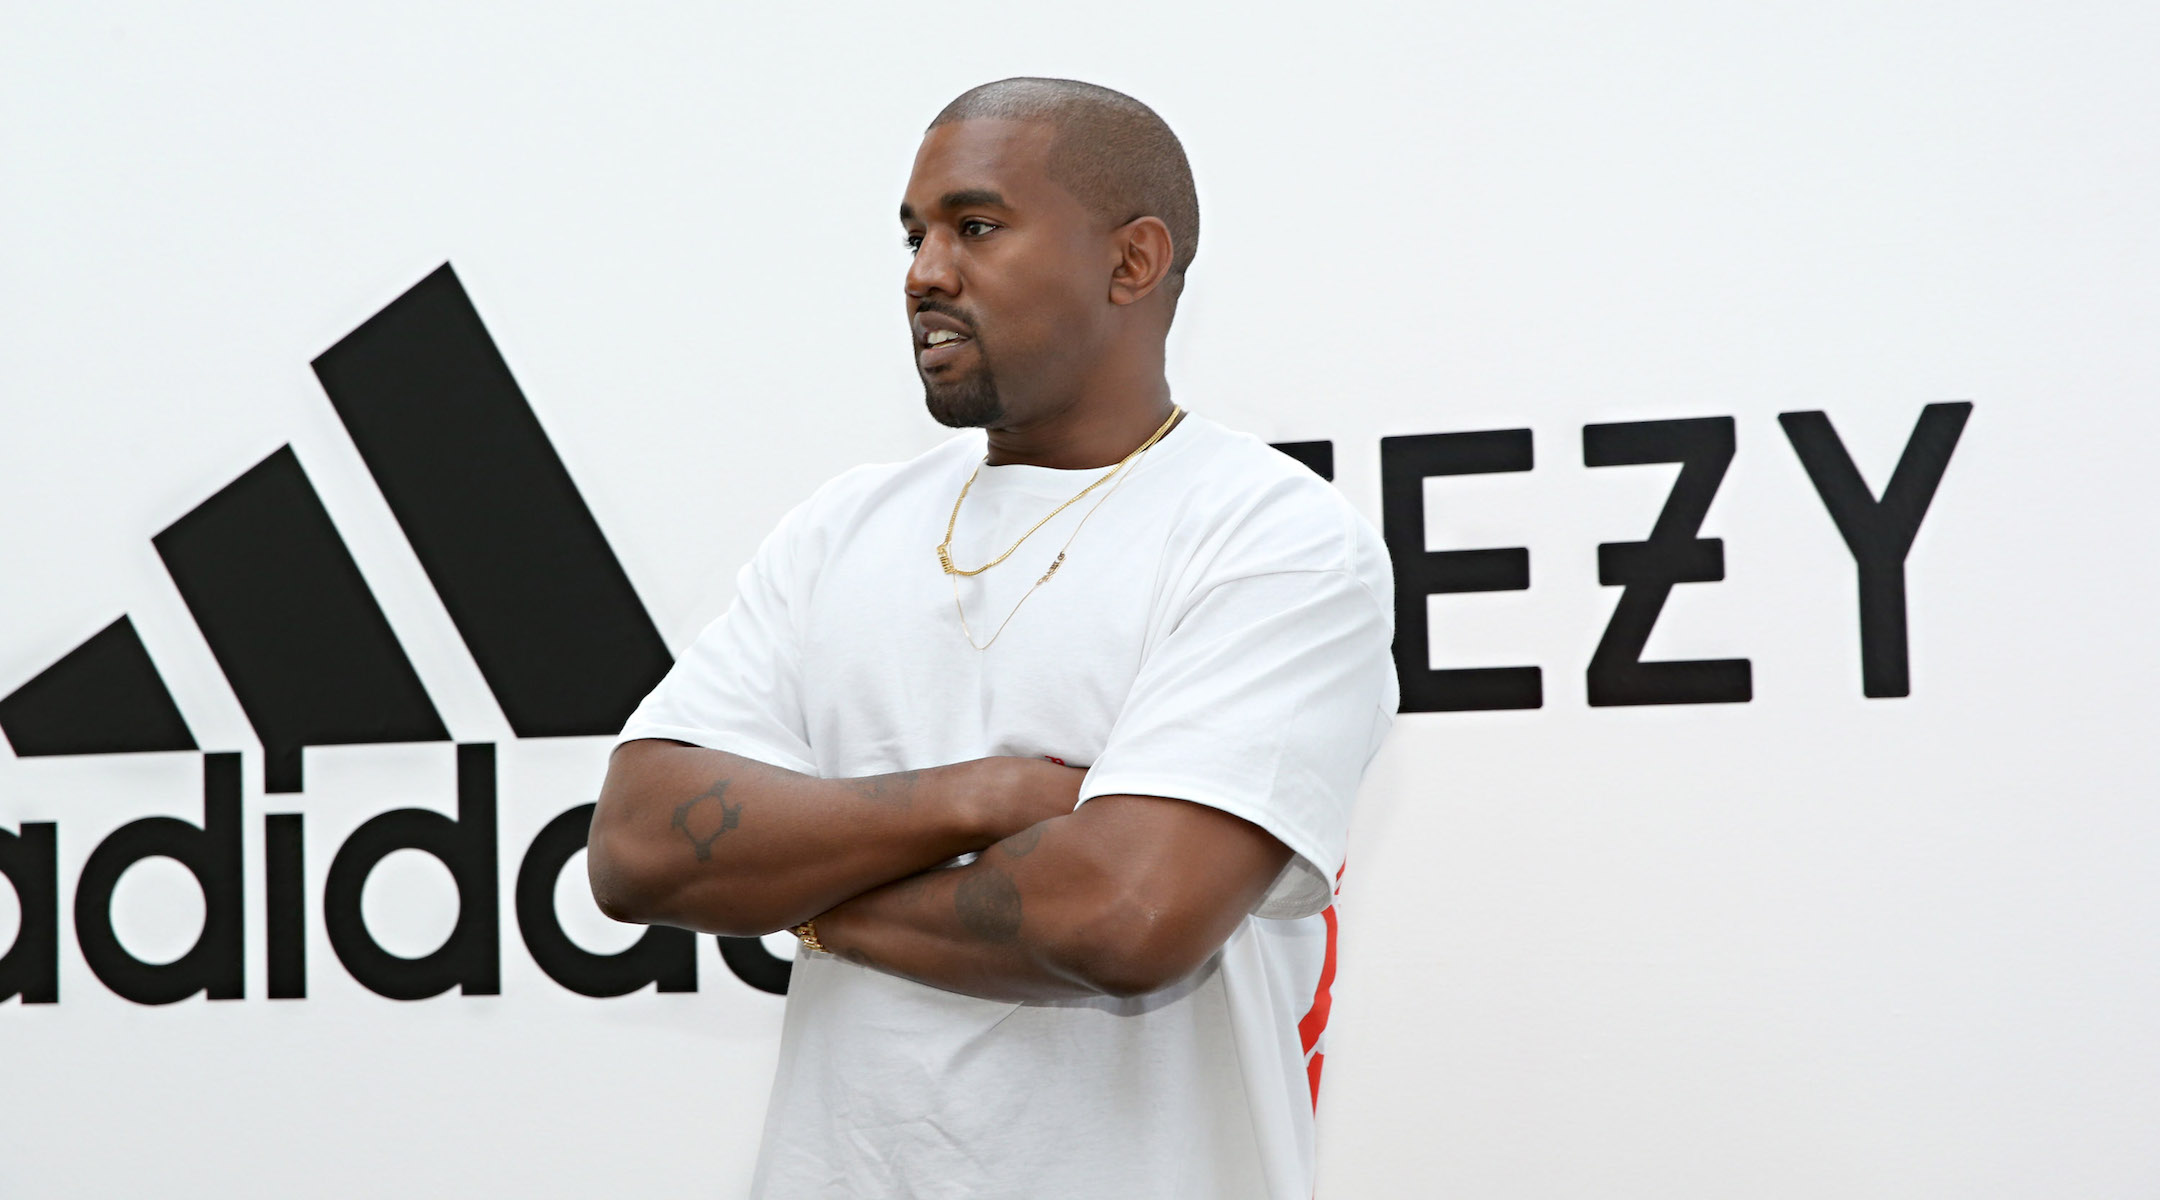 Adidas CEO: Kanye West didn’t mean his antisemitic comments